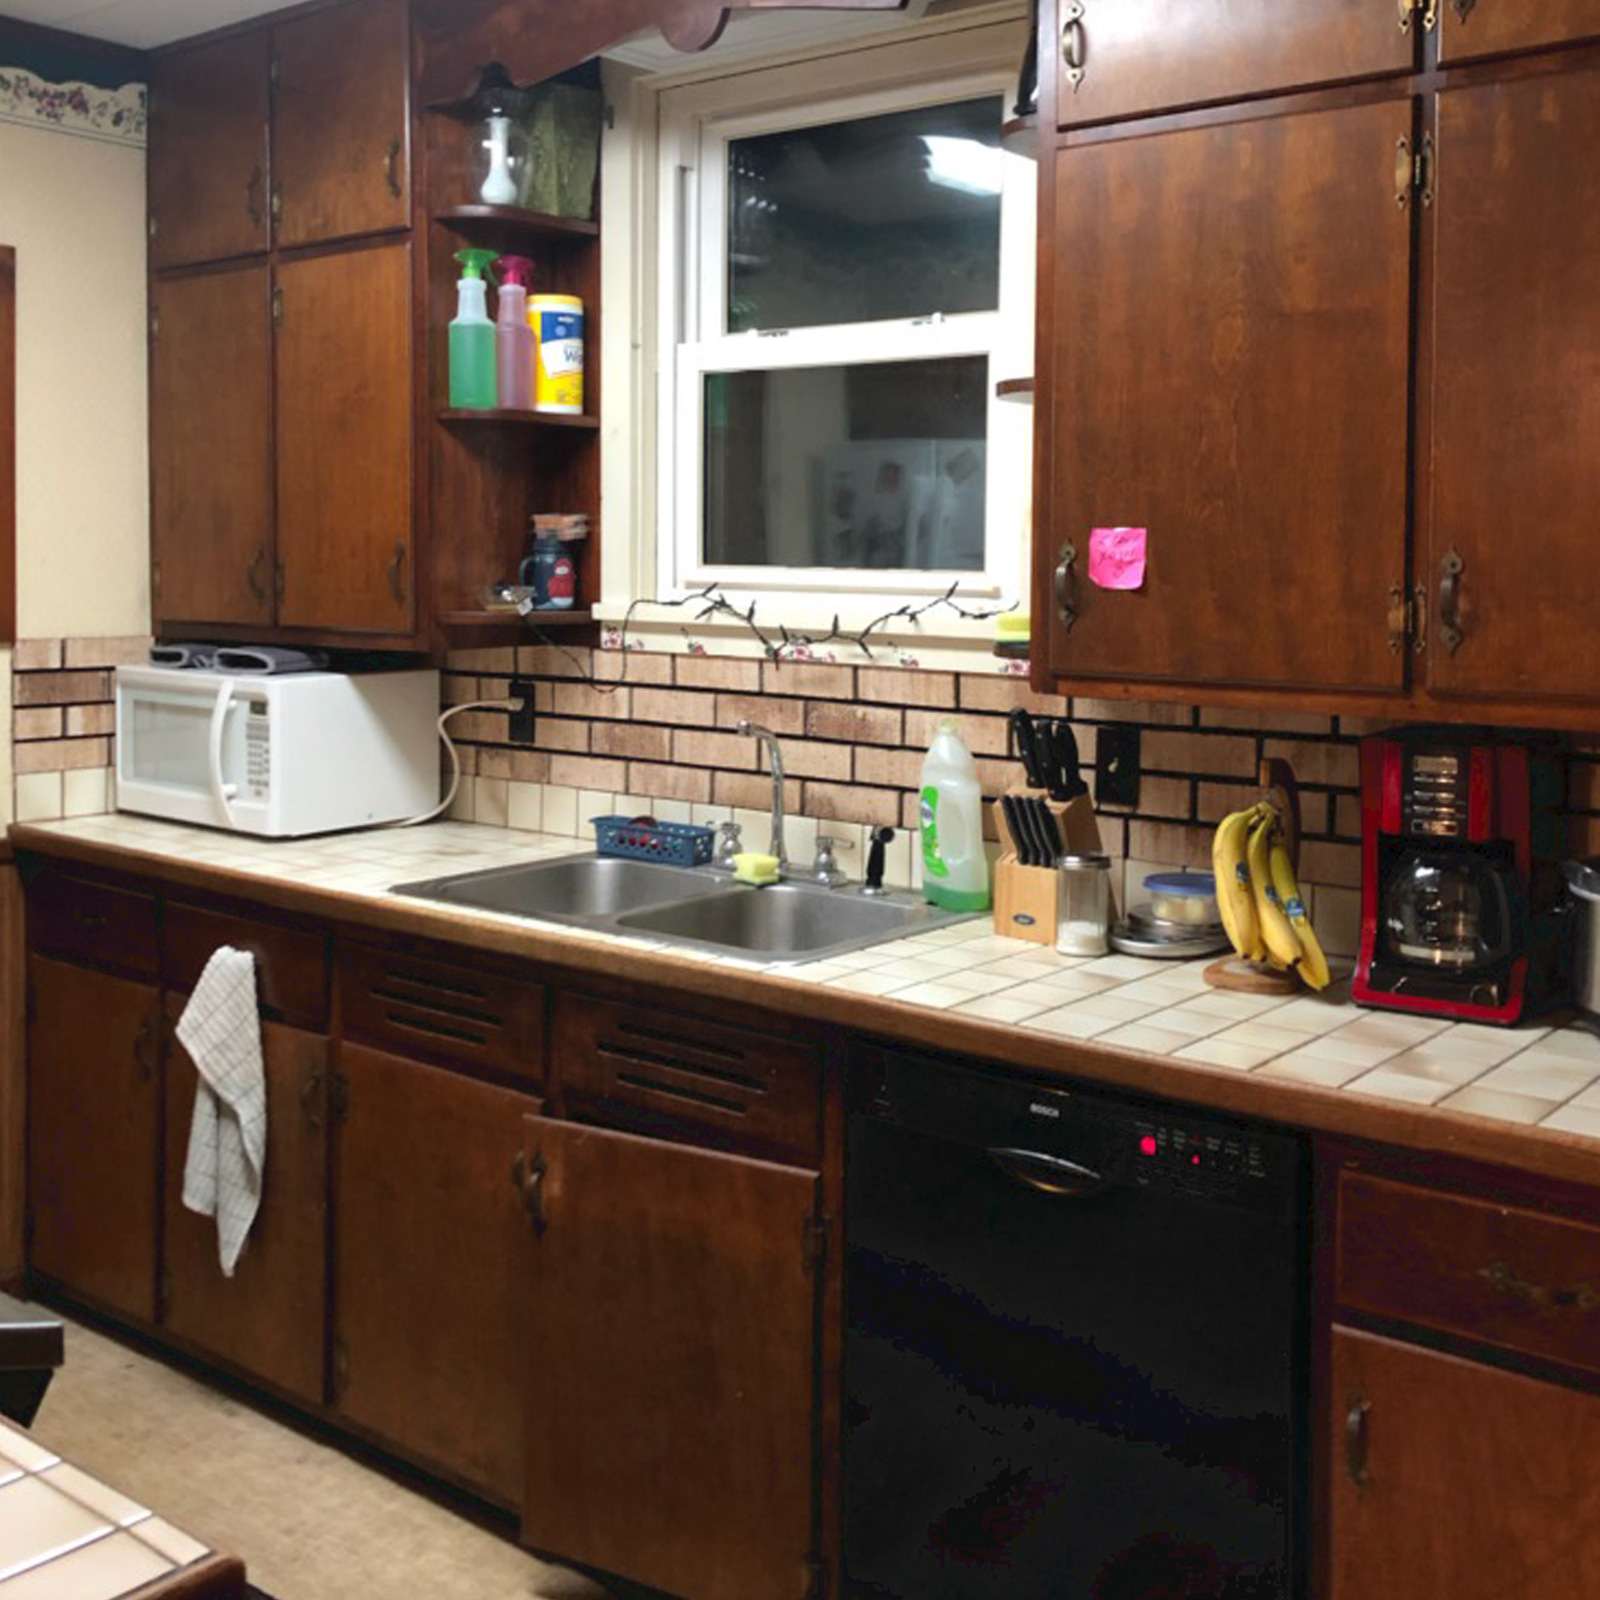 Entry 69 - Undesirable cabinets that need to be replaced